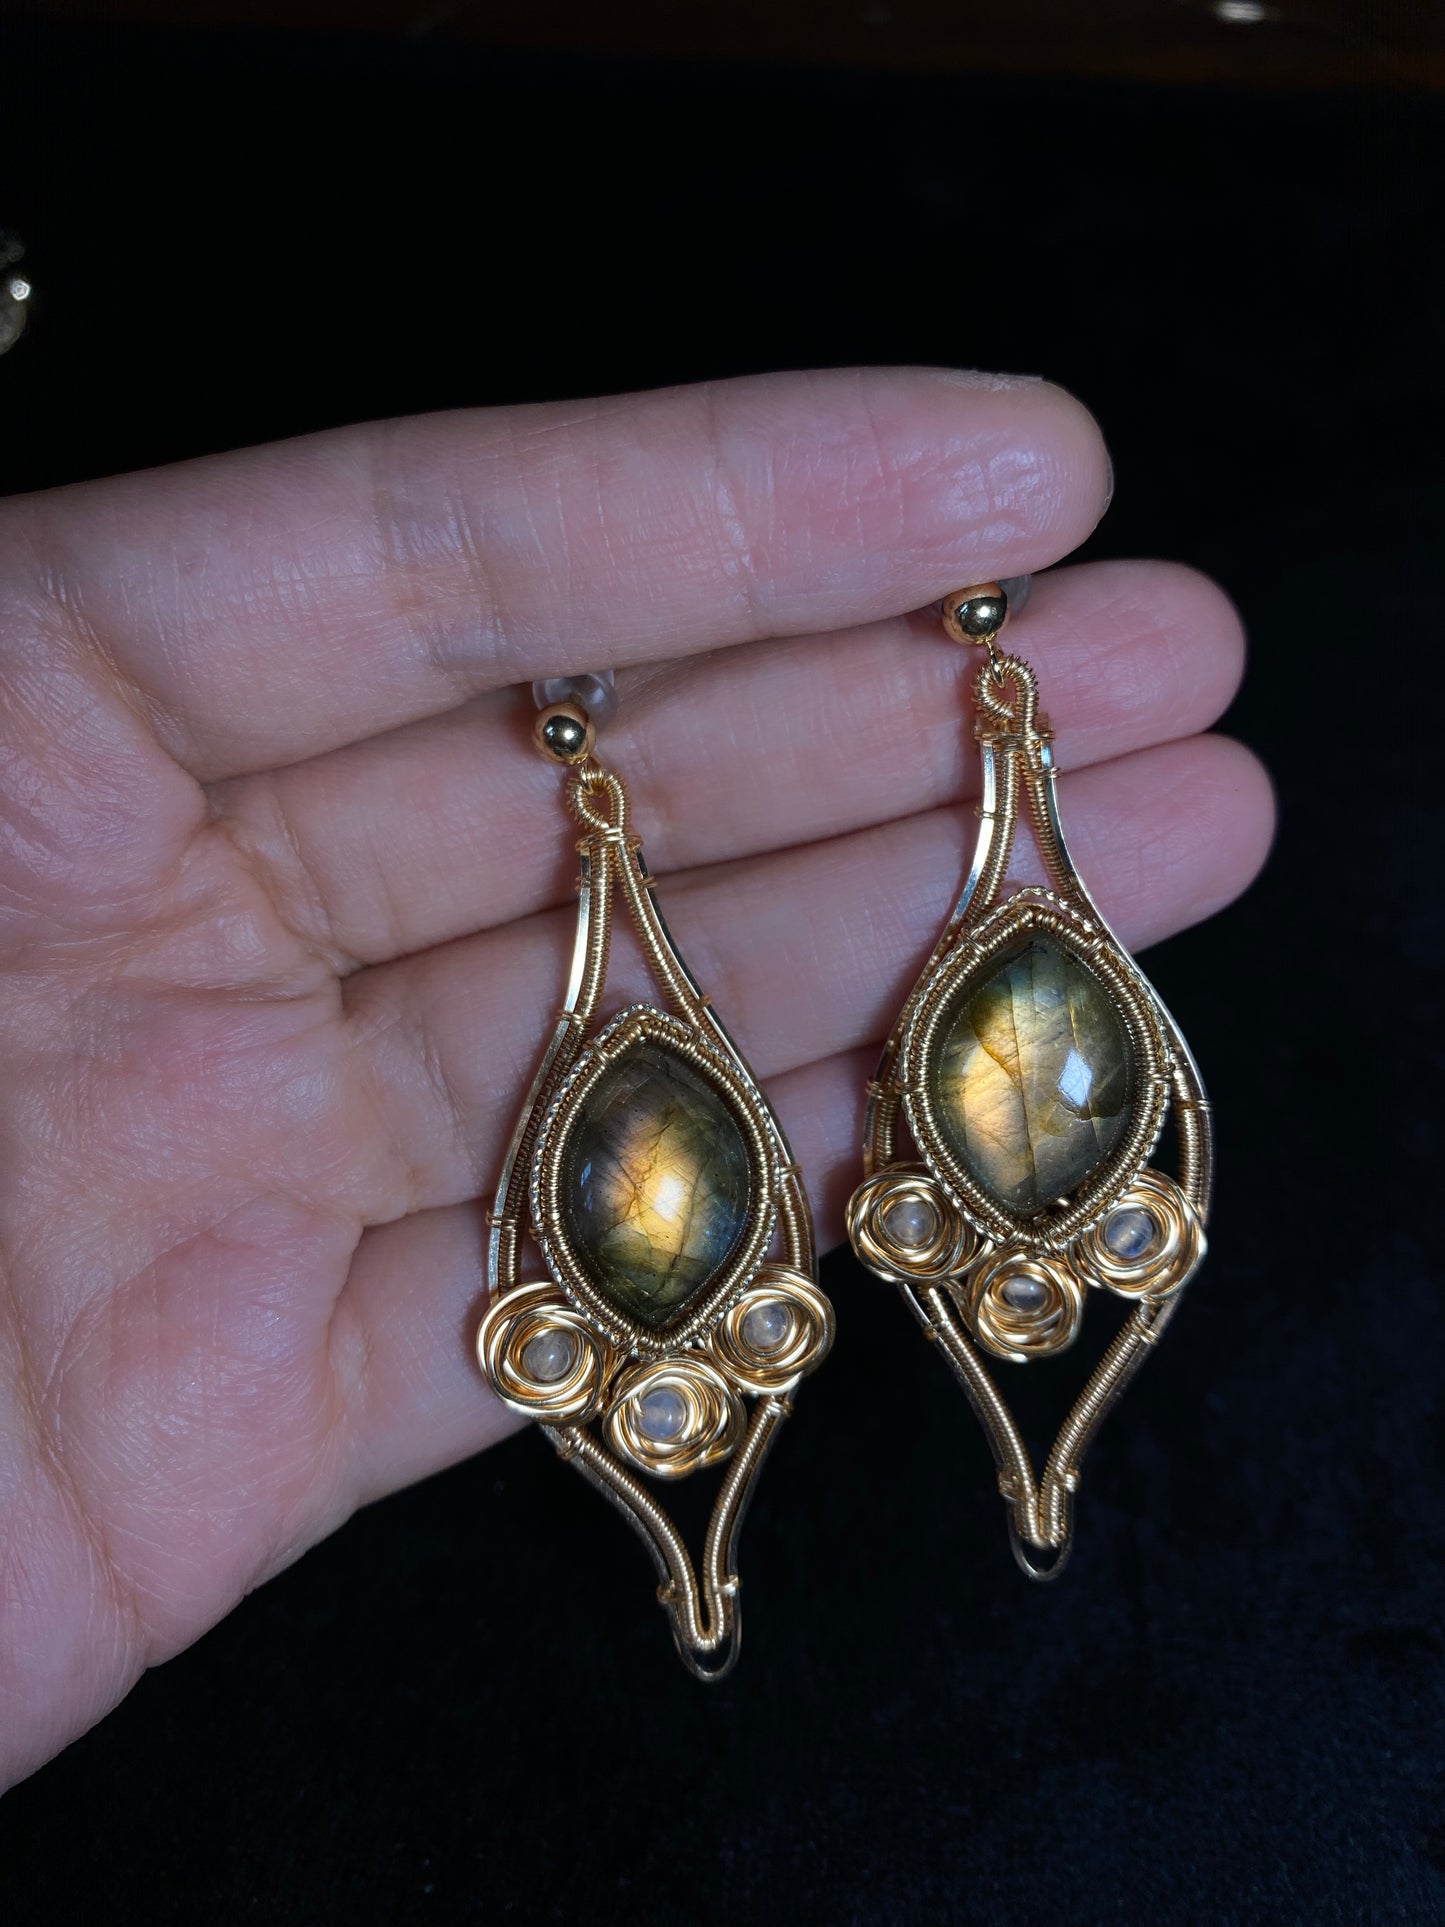 Handmade Yellow Labradorite And Rose Earrings - Wire Wrapped Jewelry